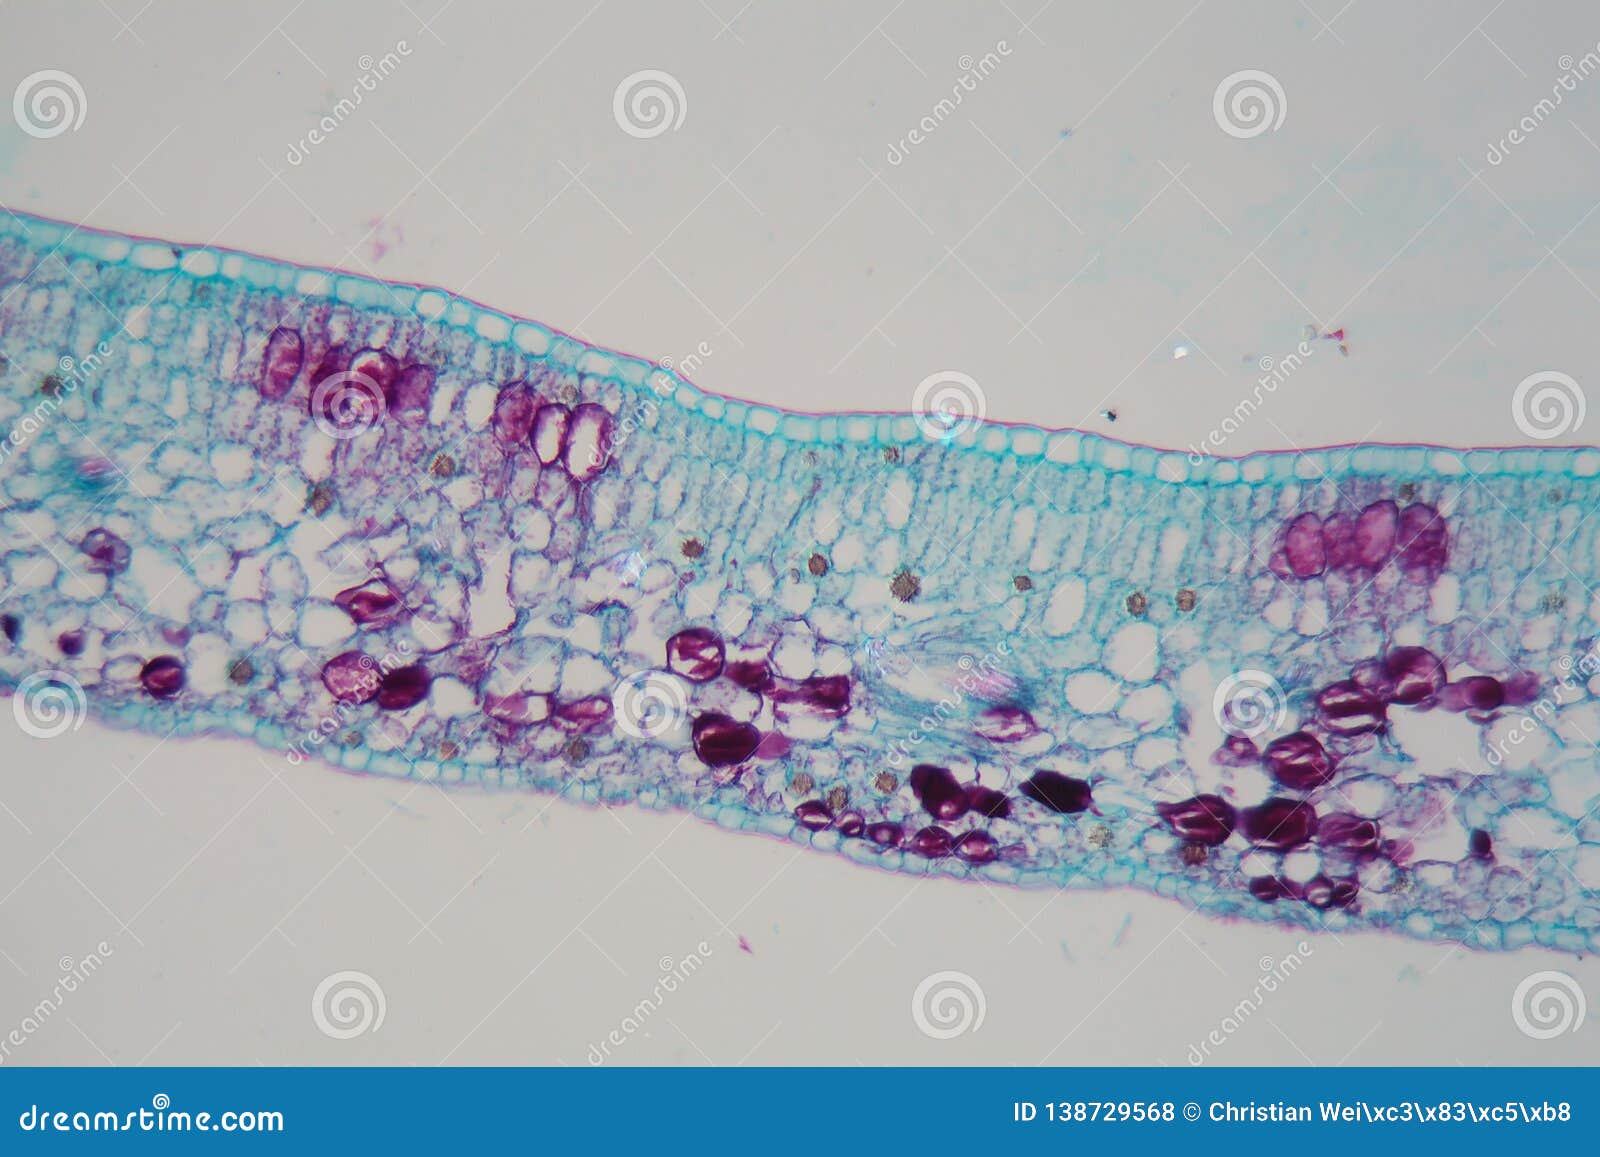 cells of a plant leaf with damaged epidermis and chloroplasts under a microscope